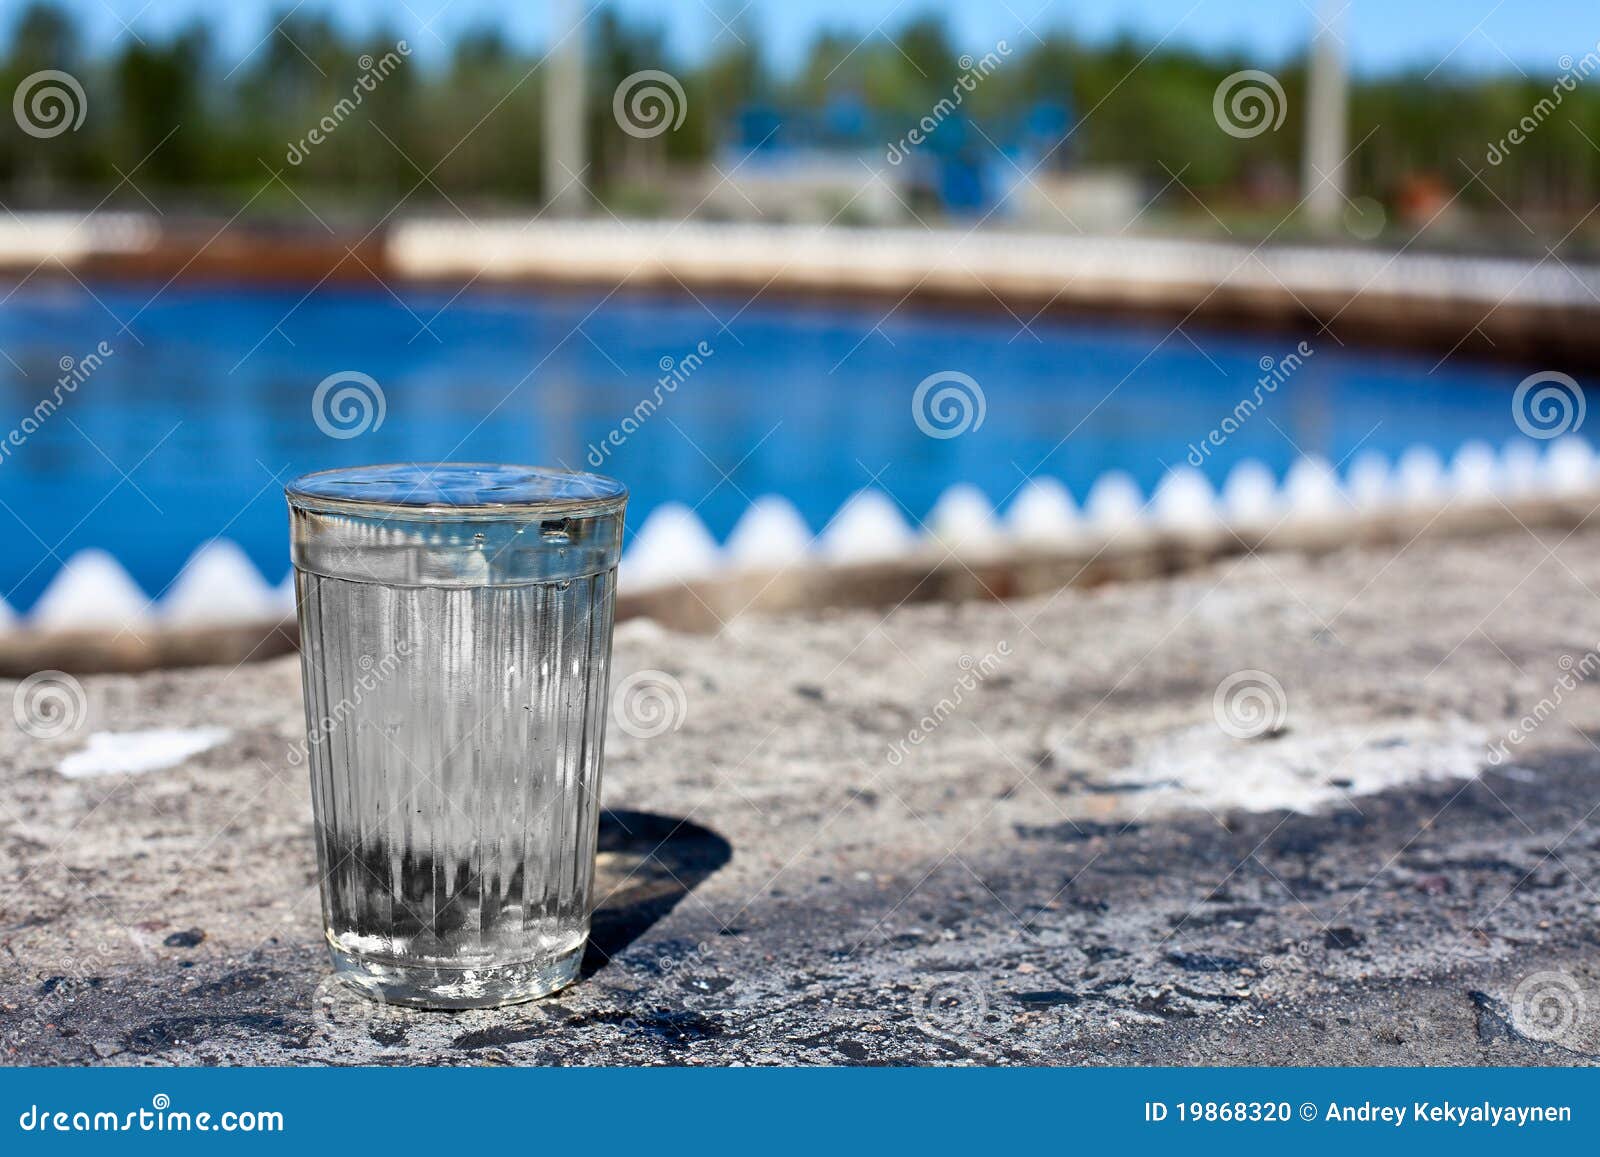 clear glass filled with purified water